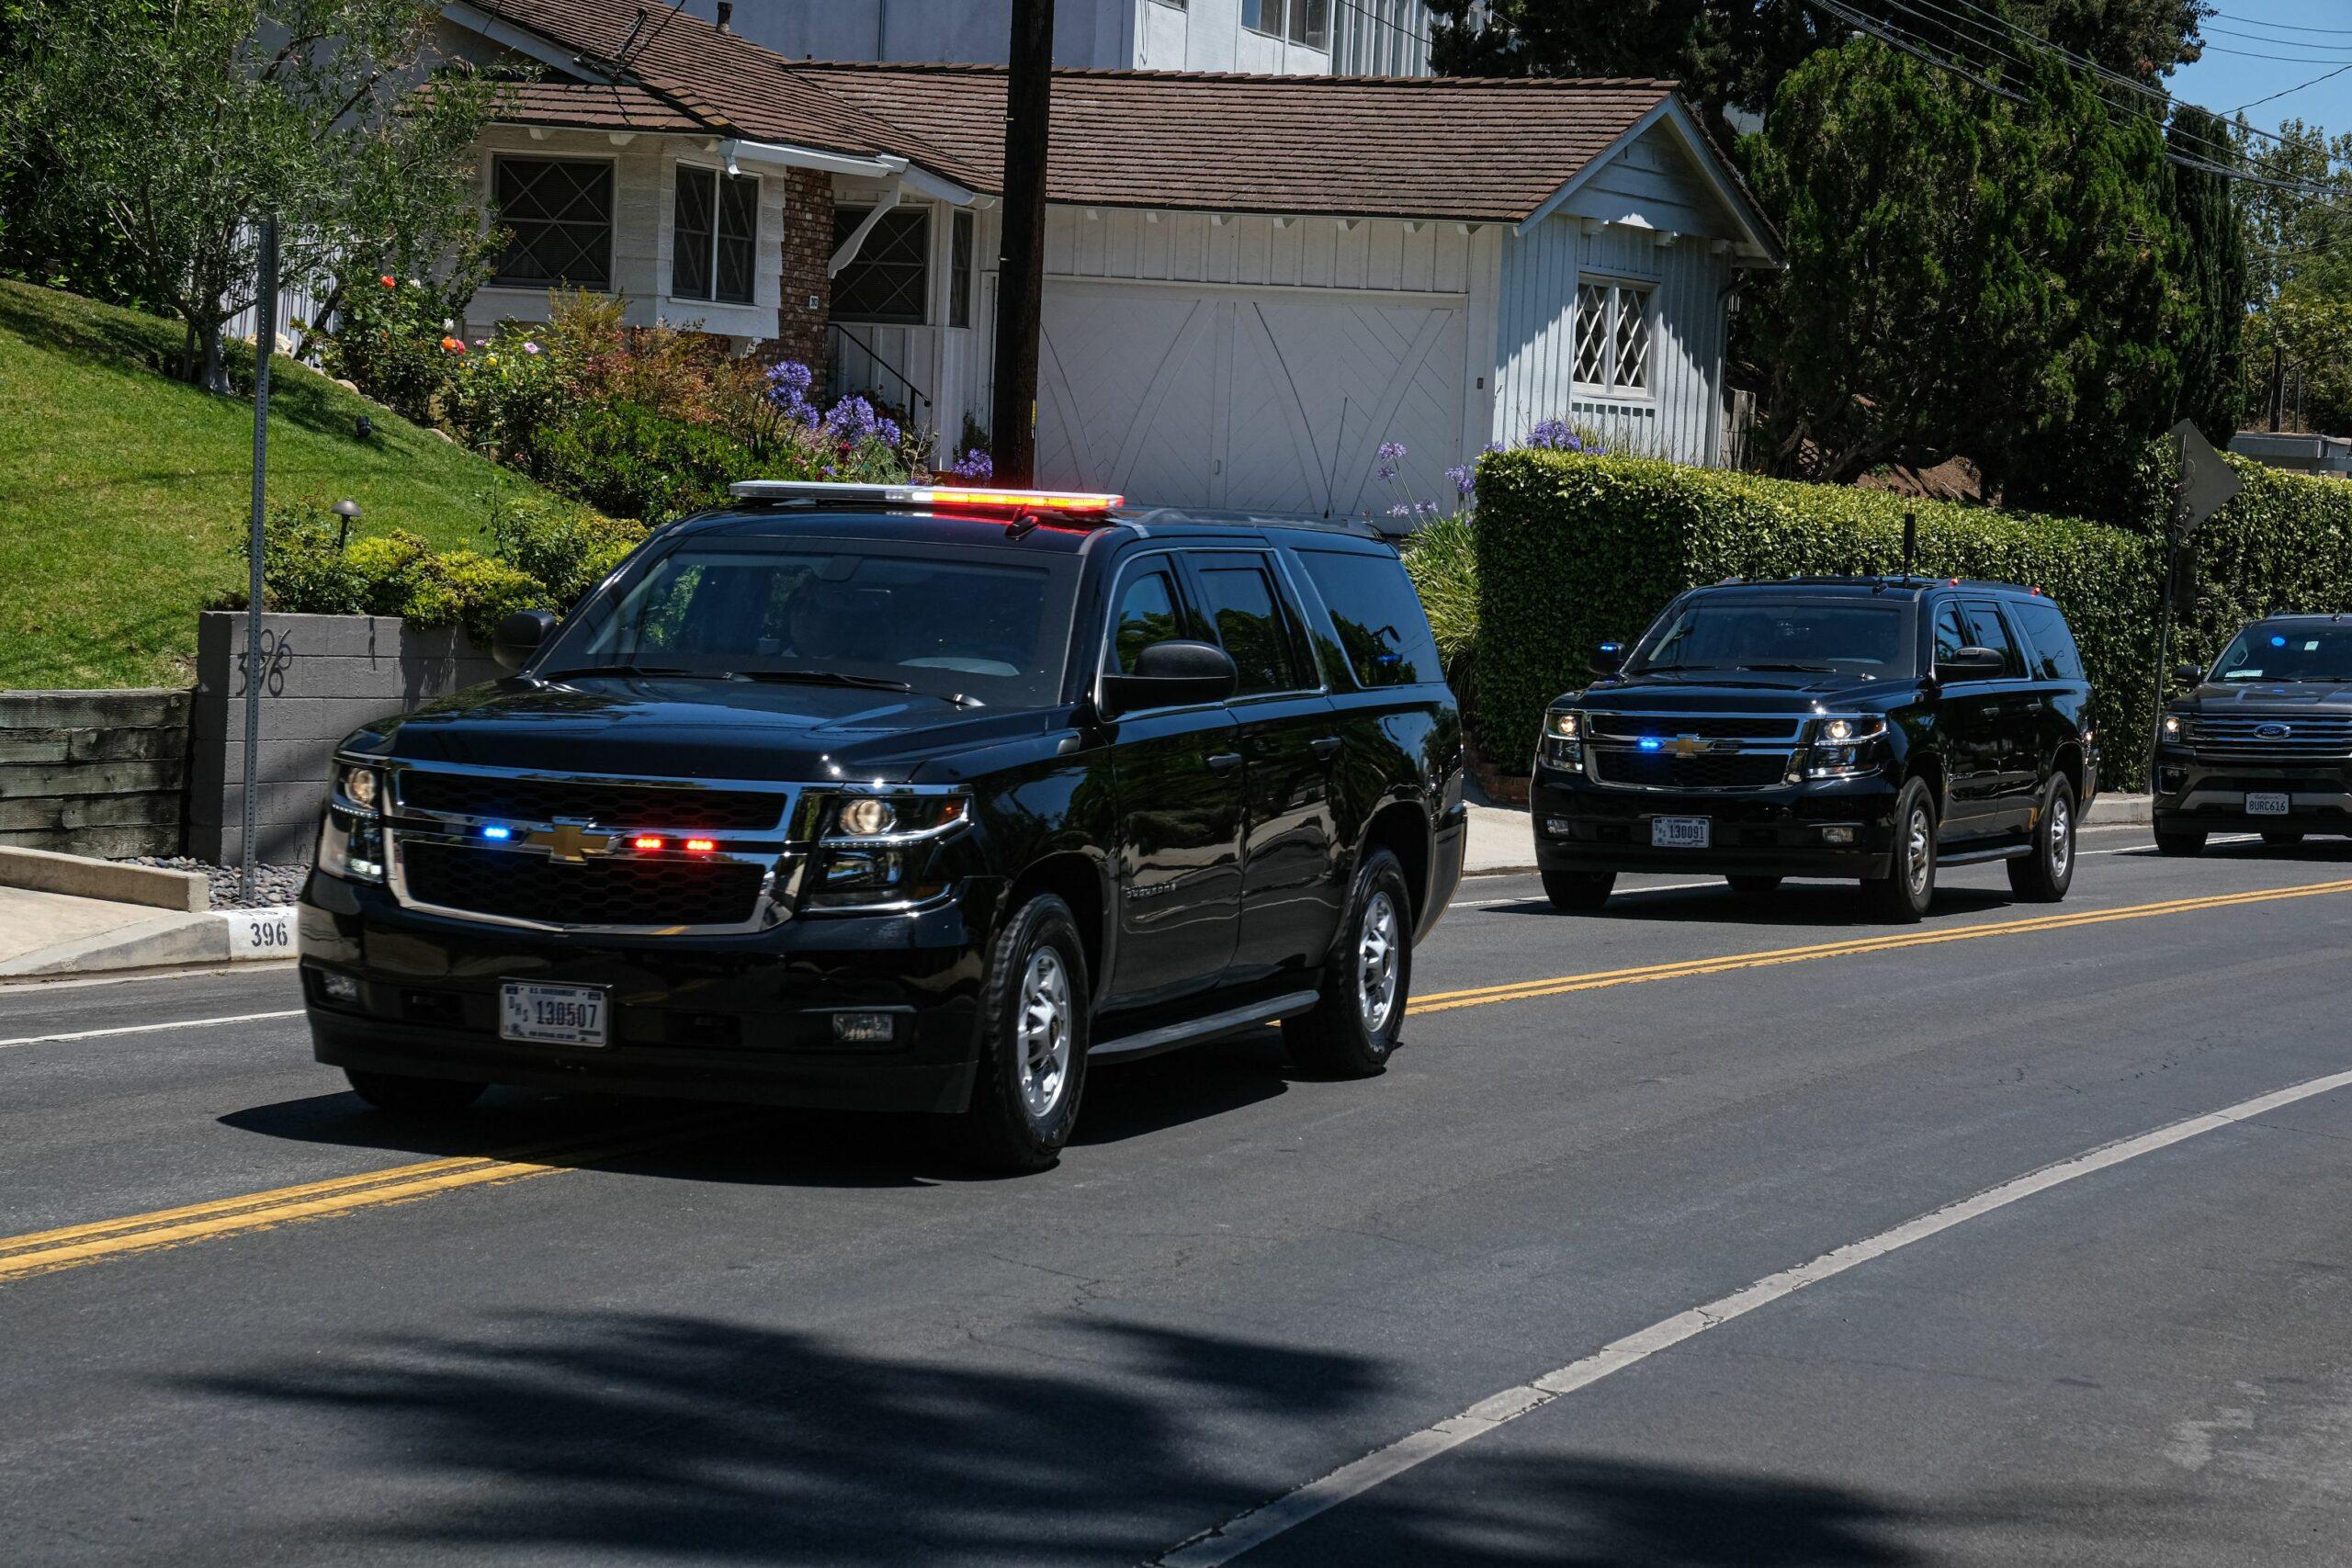 Vice President Kamala Harris apos s motorcade is seen arriving at her Brentwood home after flying from El Paso Texas where she spent a few hours to visit the border and address the border crisis